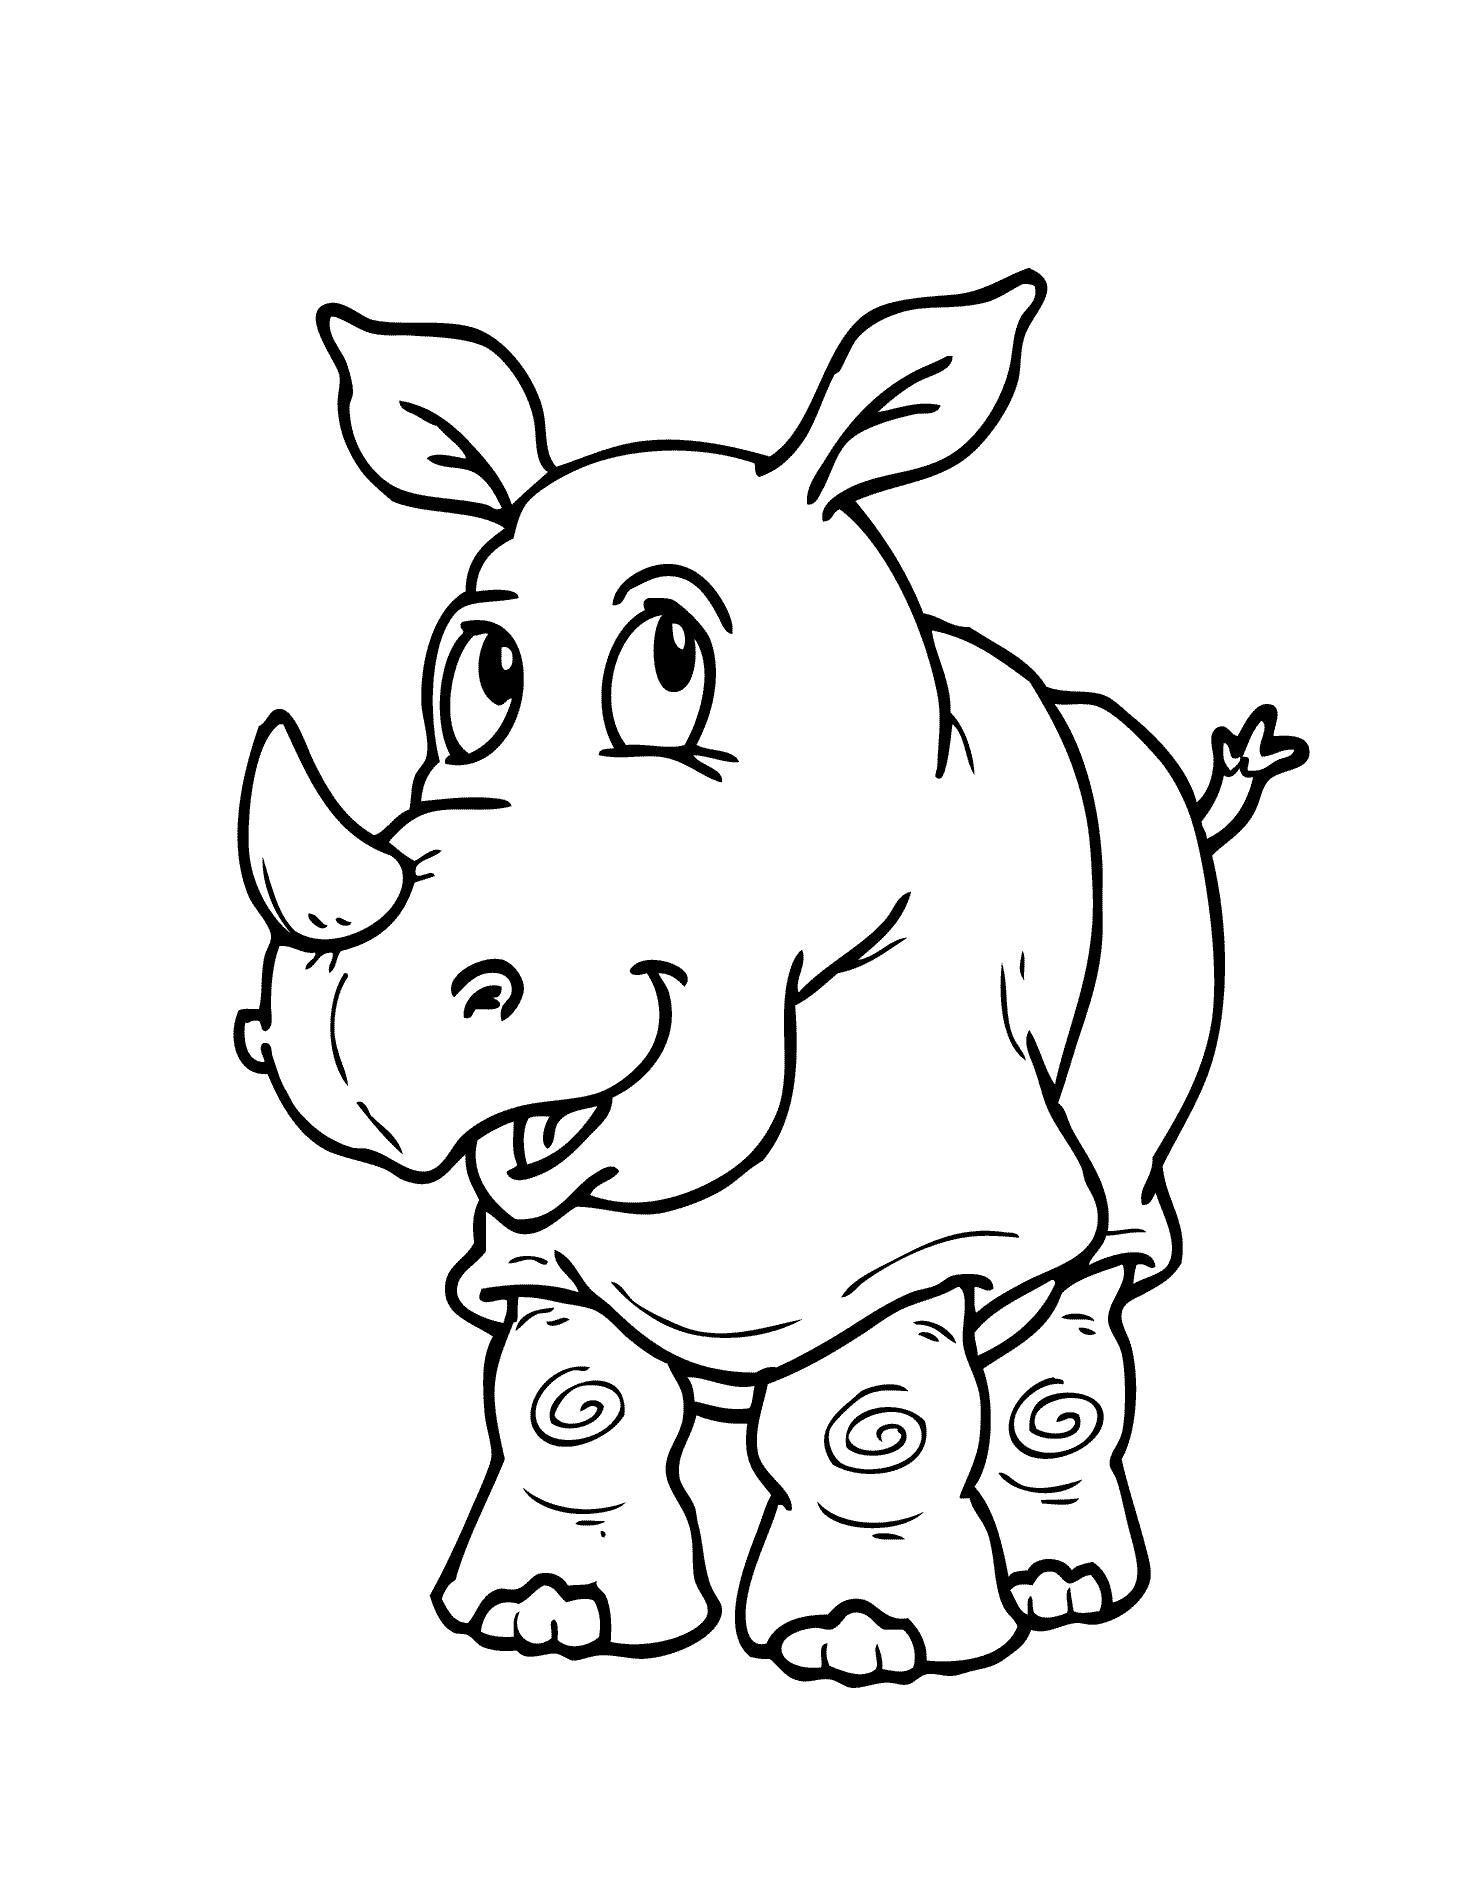 Printable Animal Coloring Pages For Kids
 Animal coloring sheets for kids Coloring pages for kids